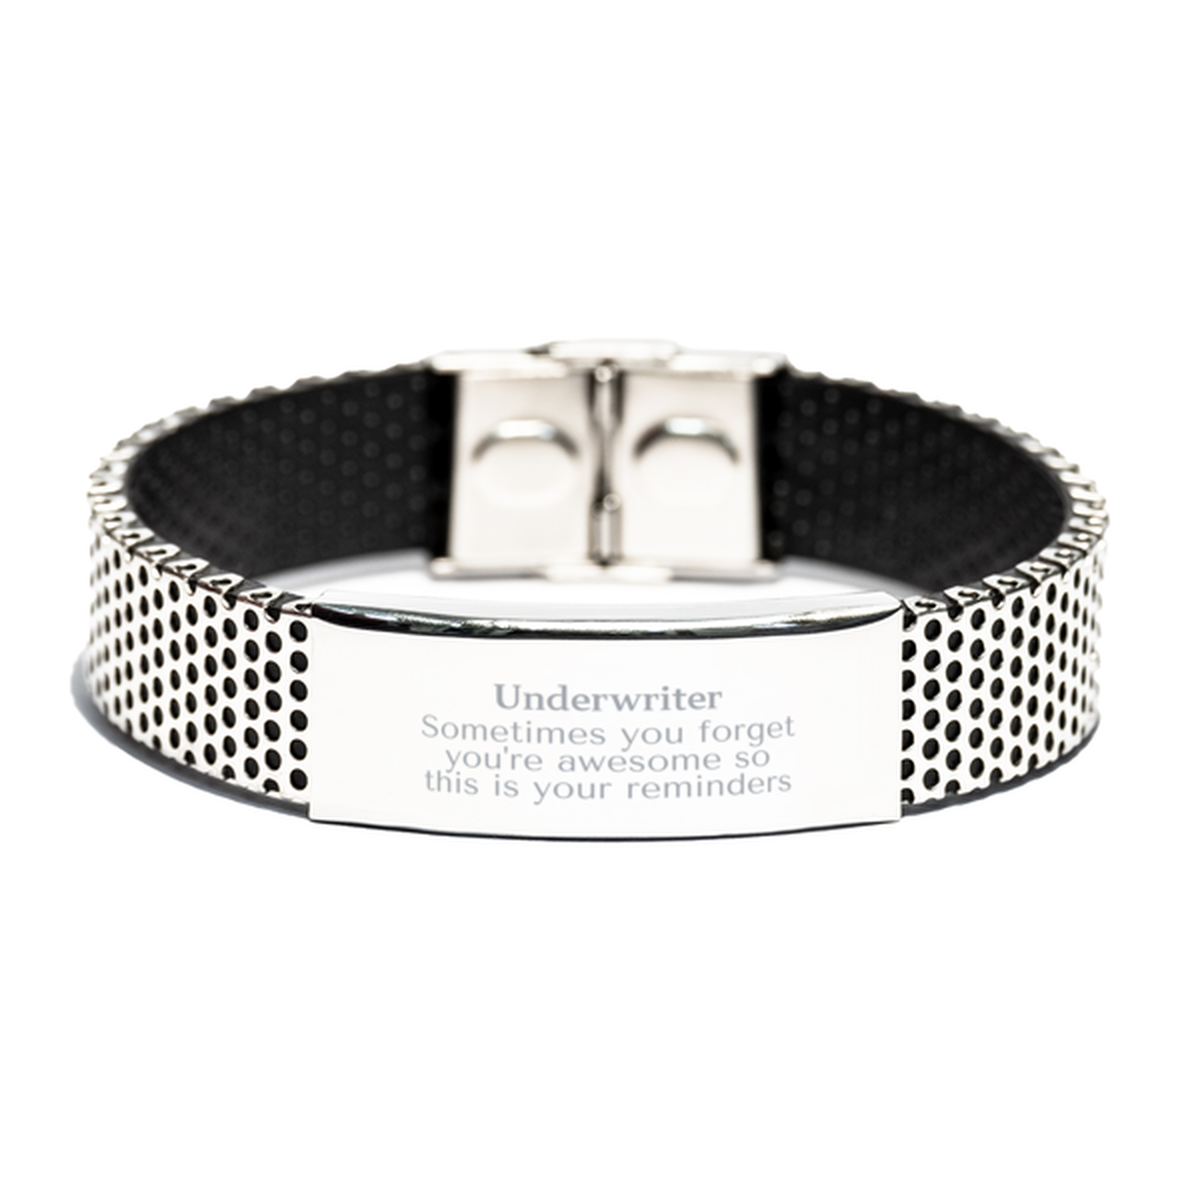 Sentimental Underwriter Stainless Steel Bracelet, Underwriter Sometimes you forget you're awesome so this is your reminders, Graduation Christmas Birthday Gifts for Underwriter, Men, Women, Coworkers